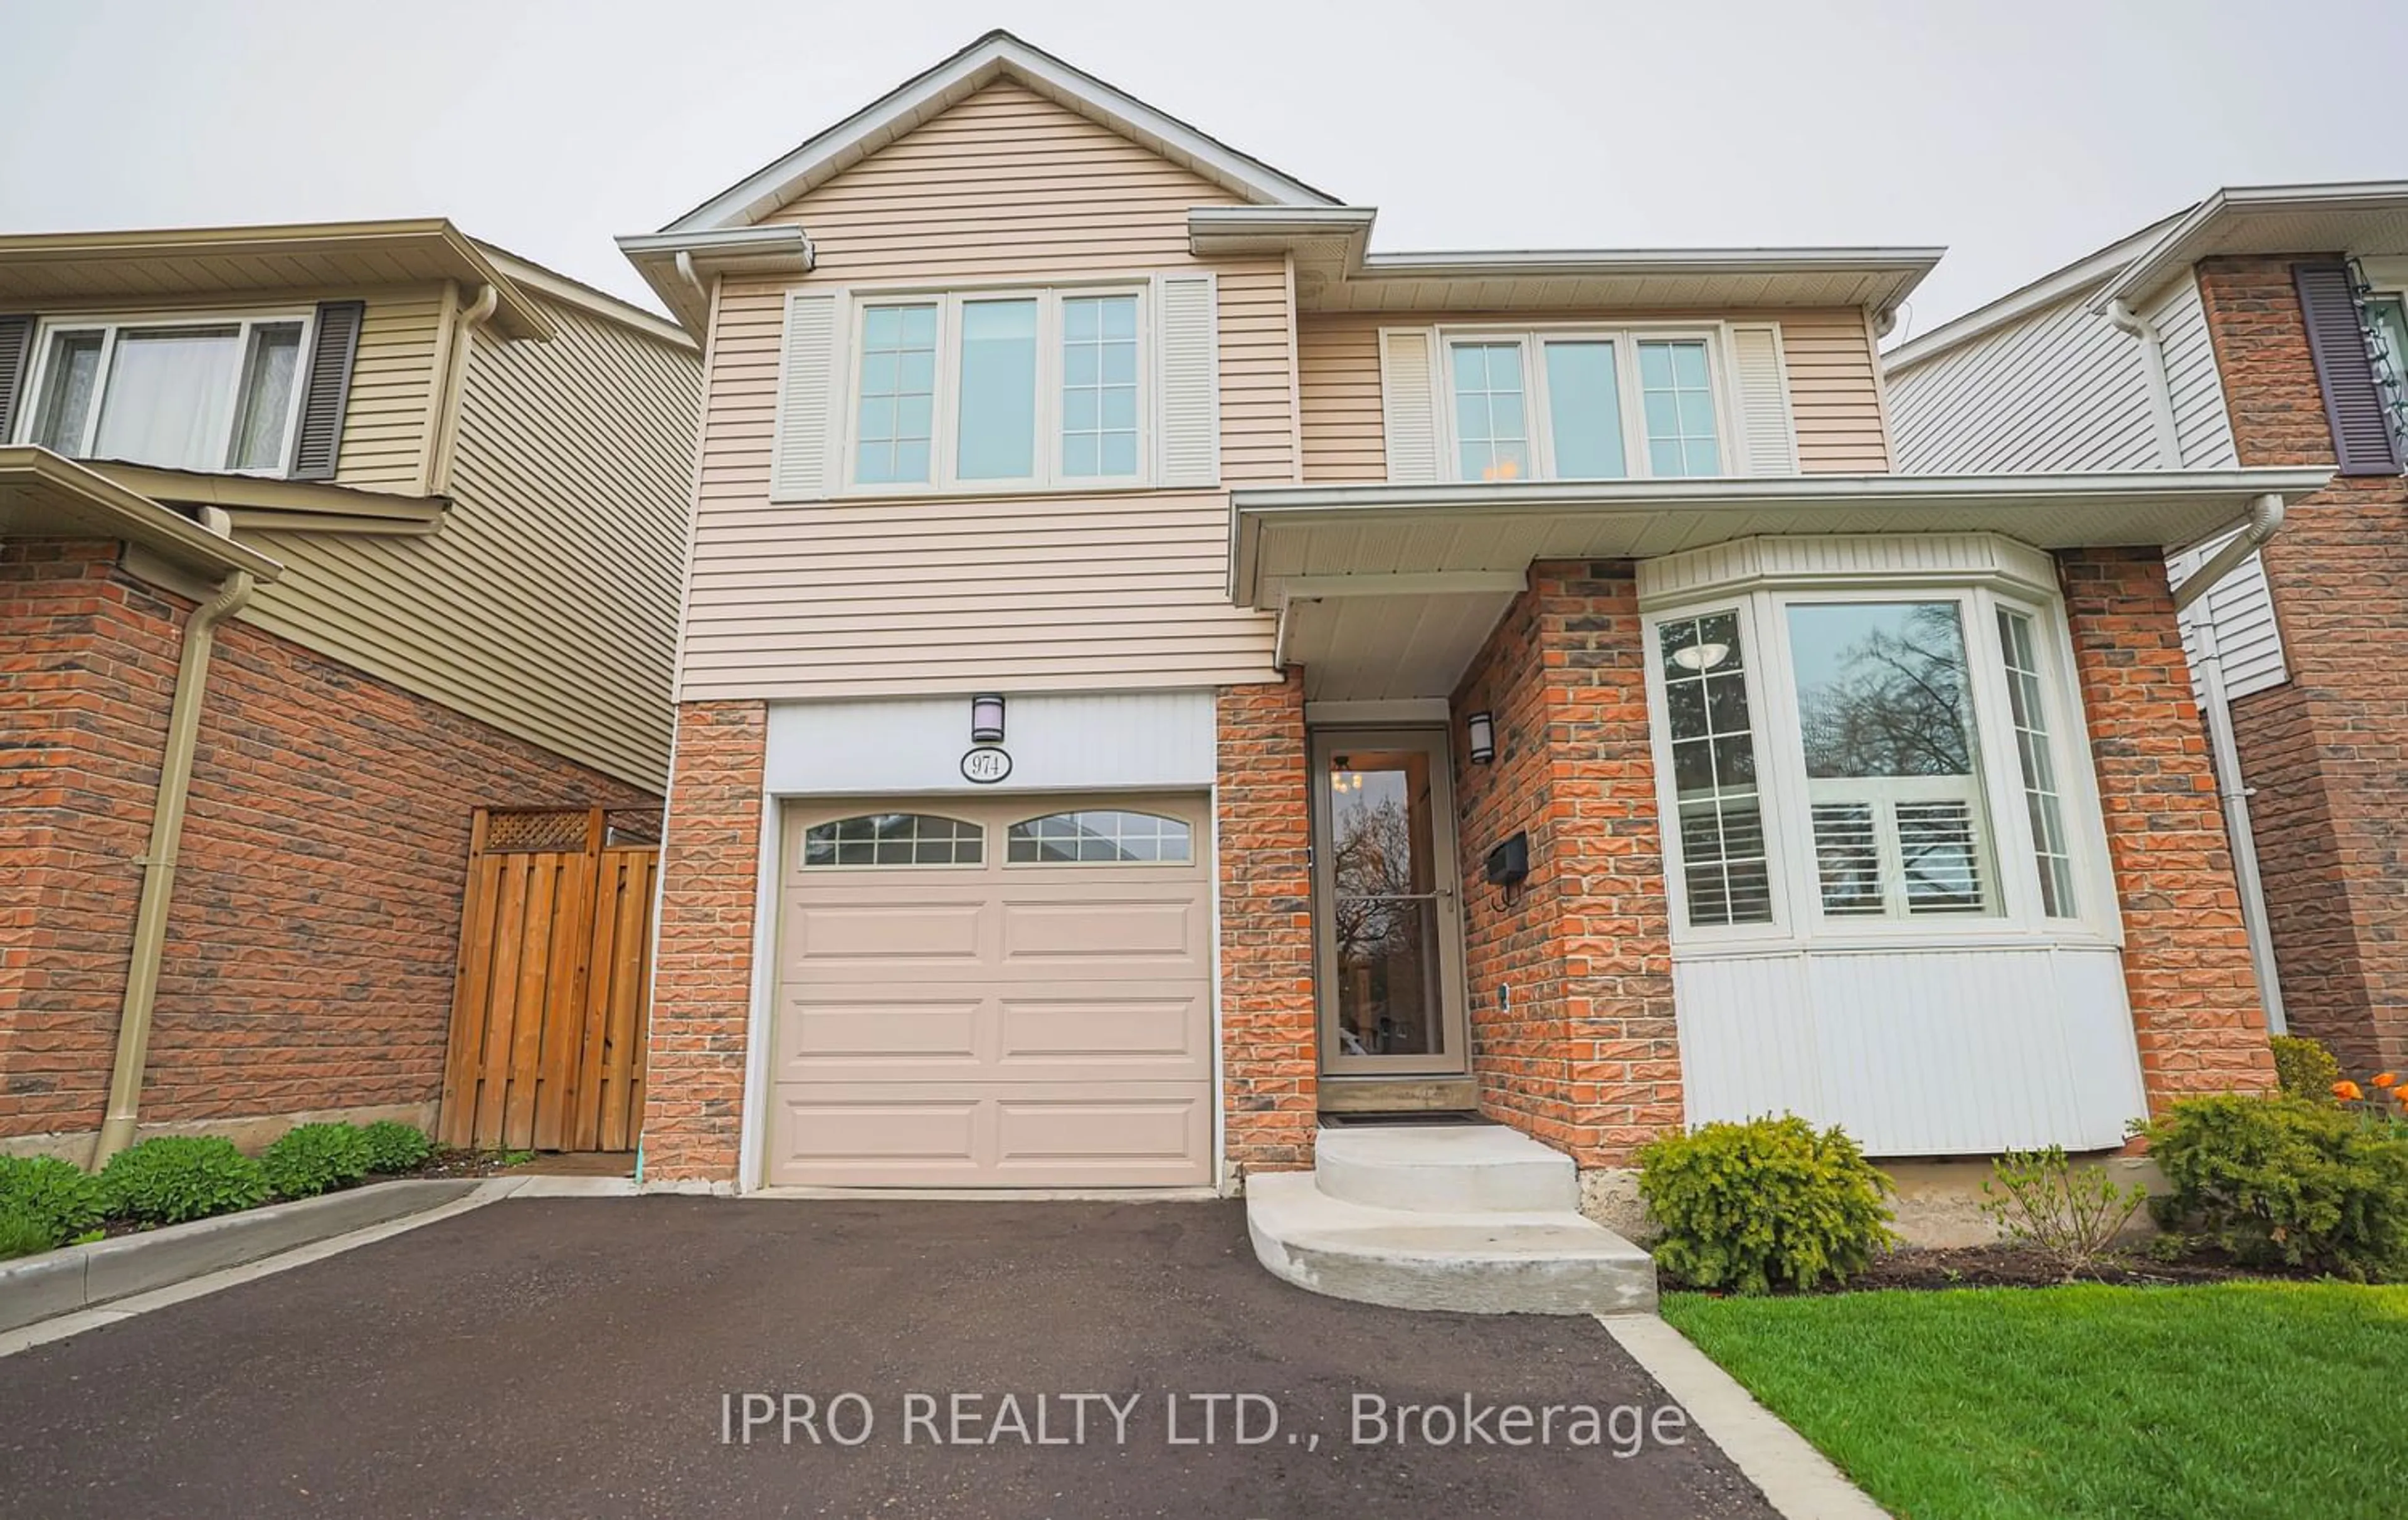 Frontside or backside of a home for 974 Raintree Lane, Mississauga Ontario L5H 3Y6